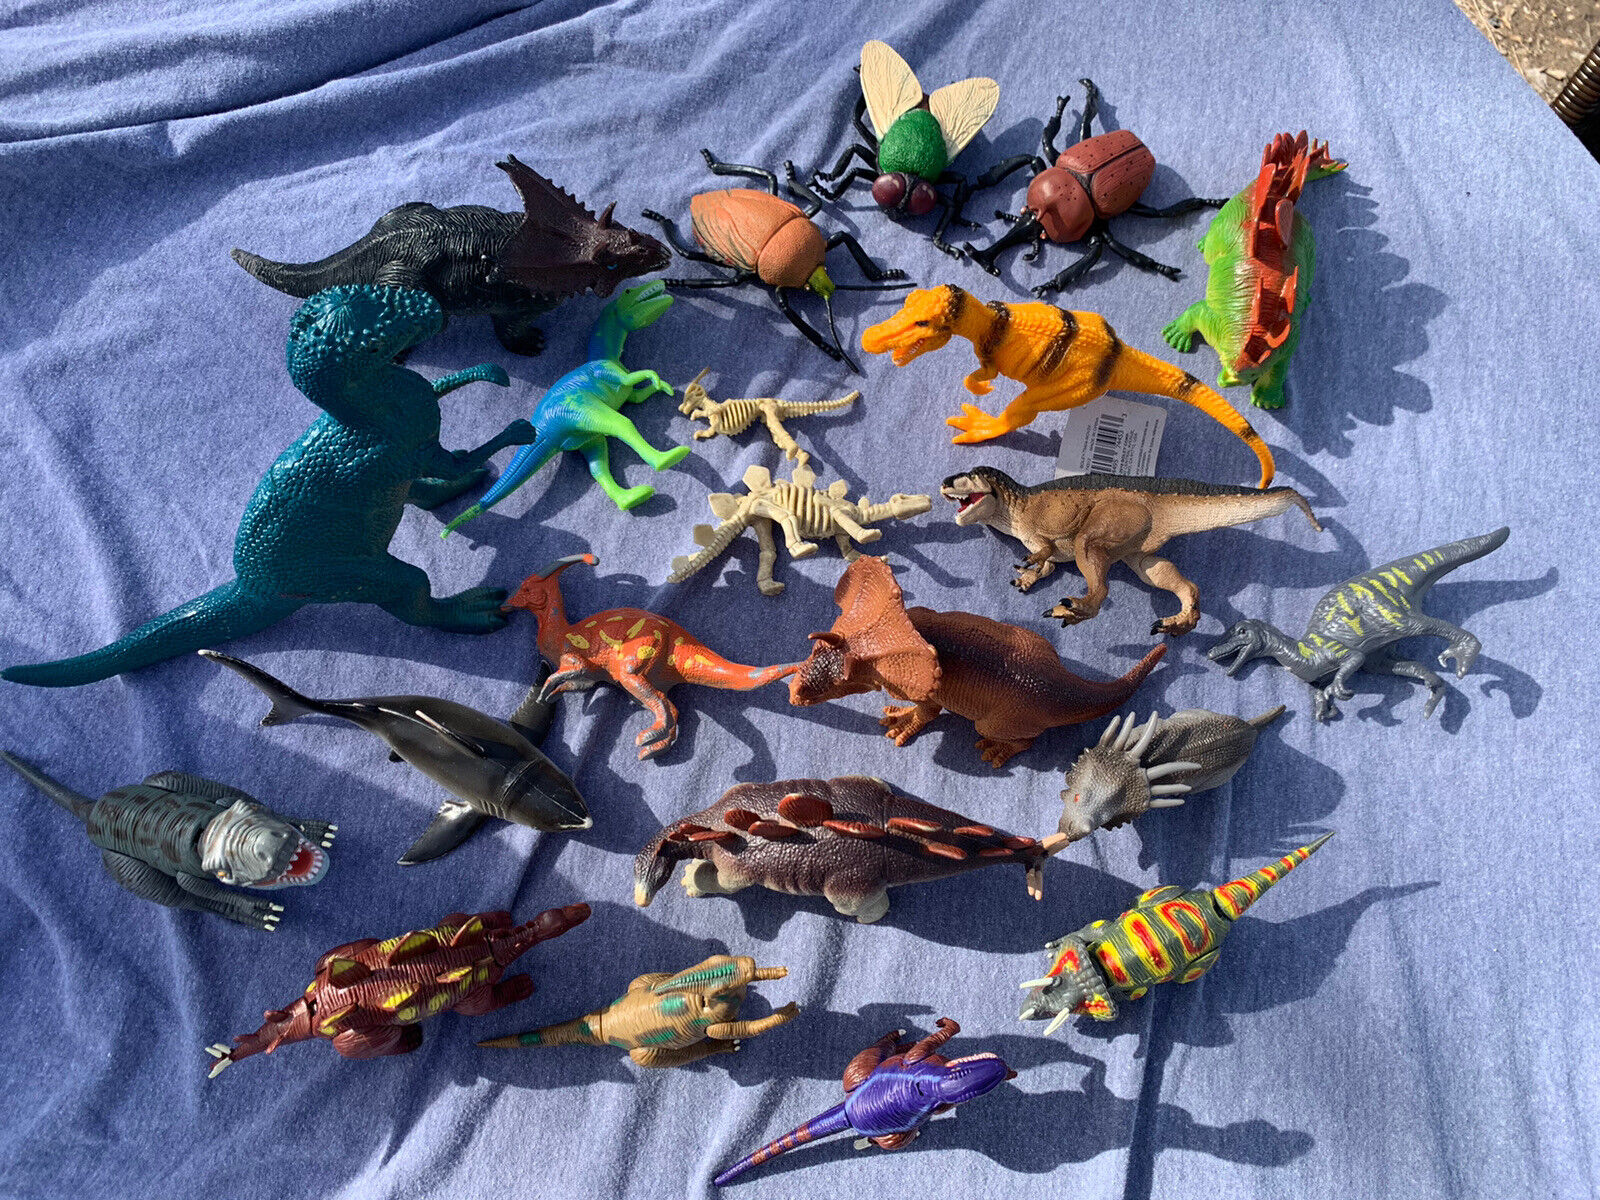 Dinosaurs Bugs Science Lot Educational Learning kids Toys 22 Pieces